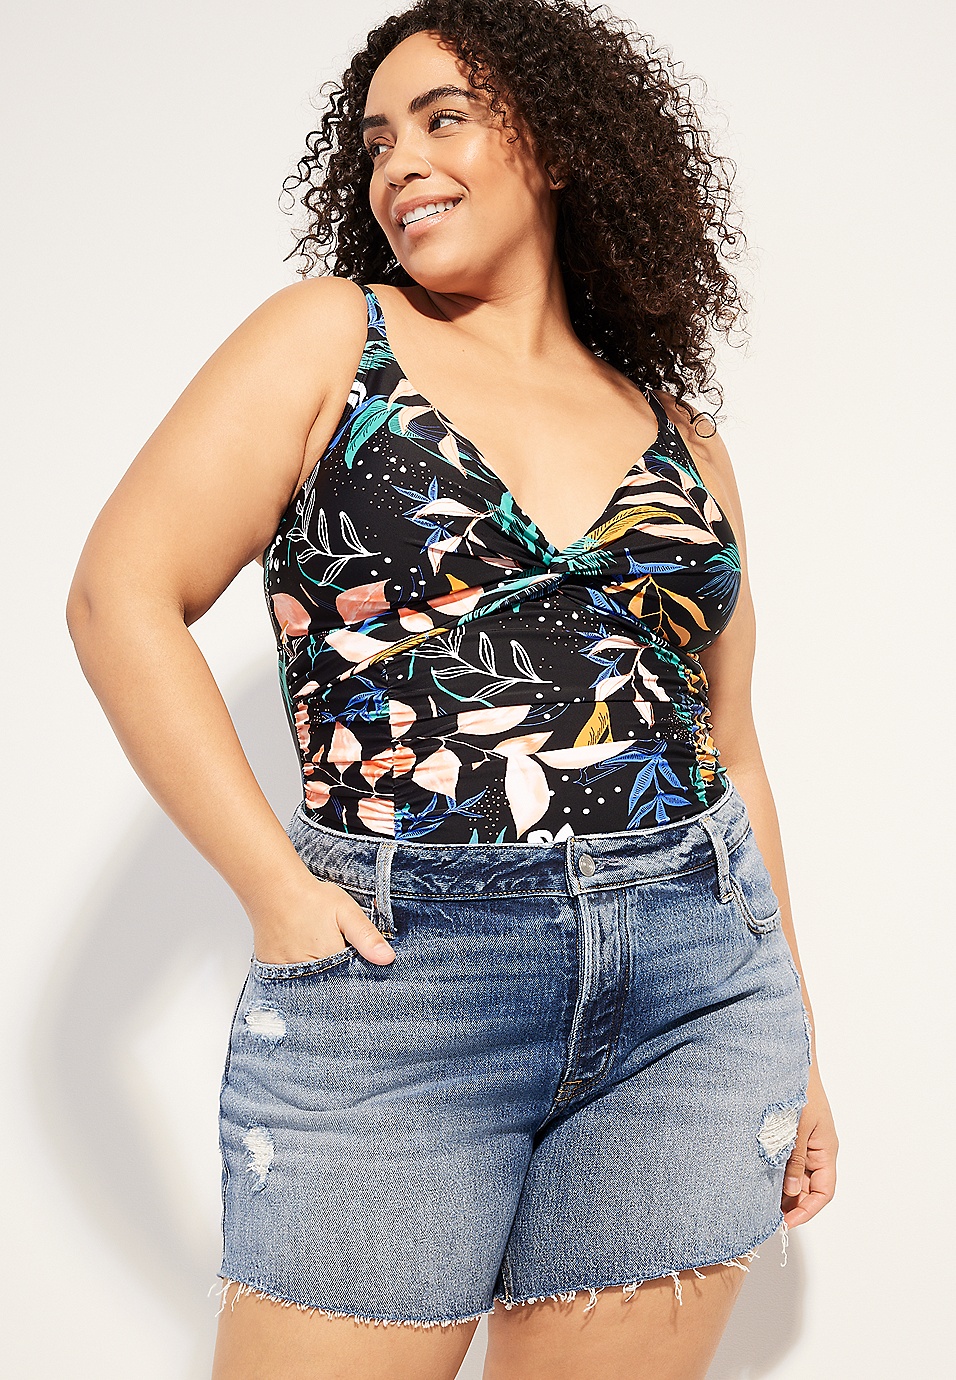 Pin on Outfits Fashion for Plus Size Swimwear